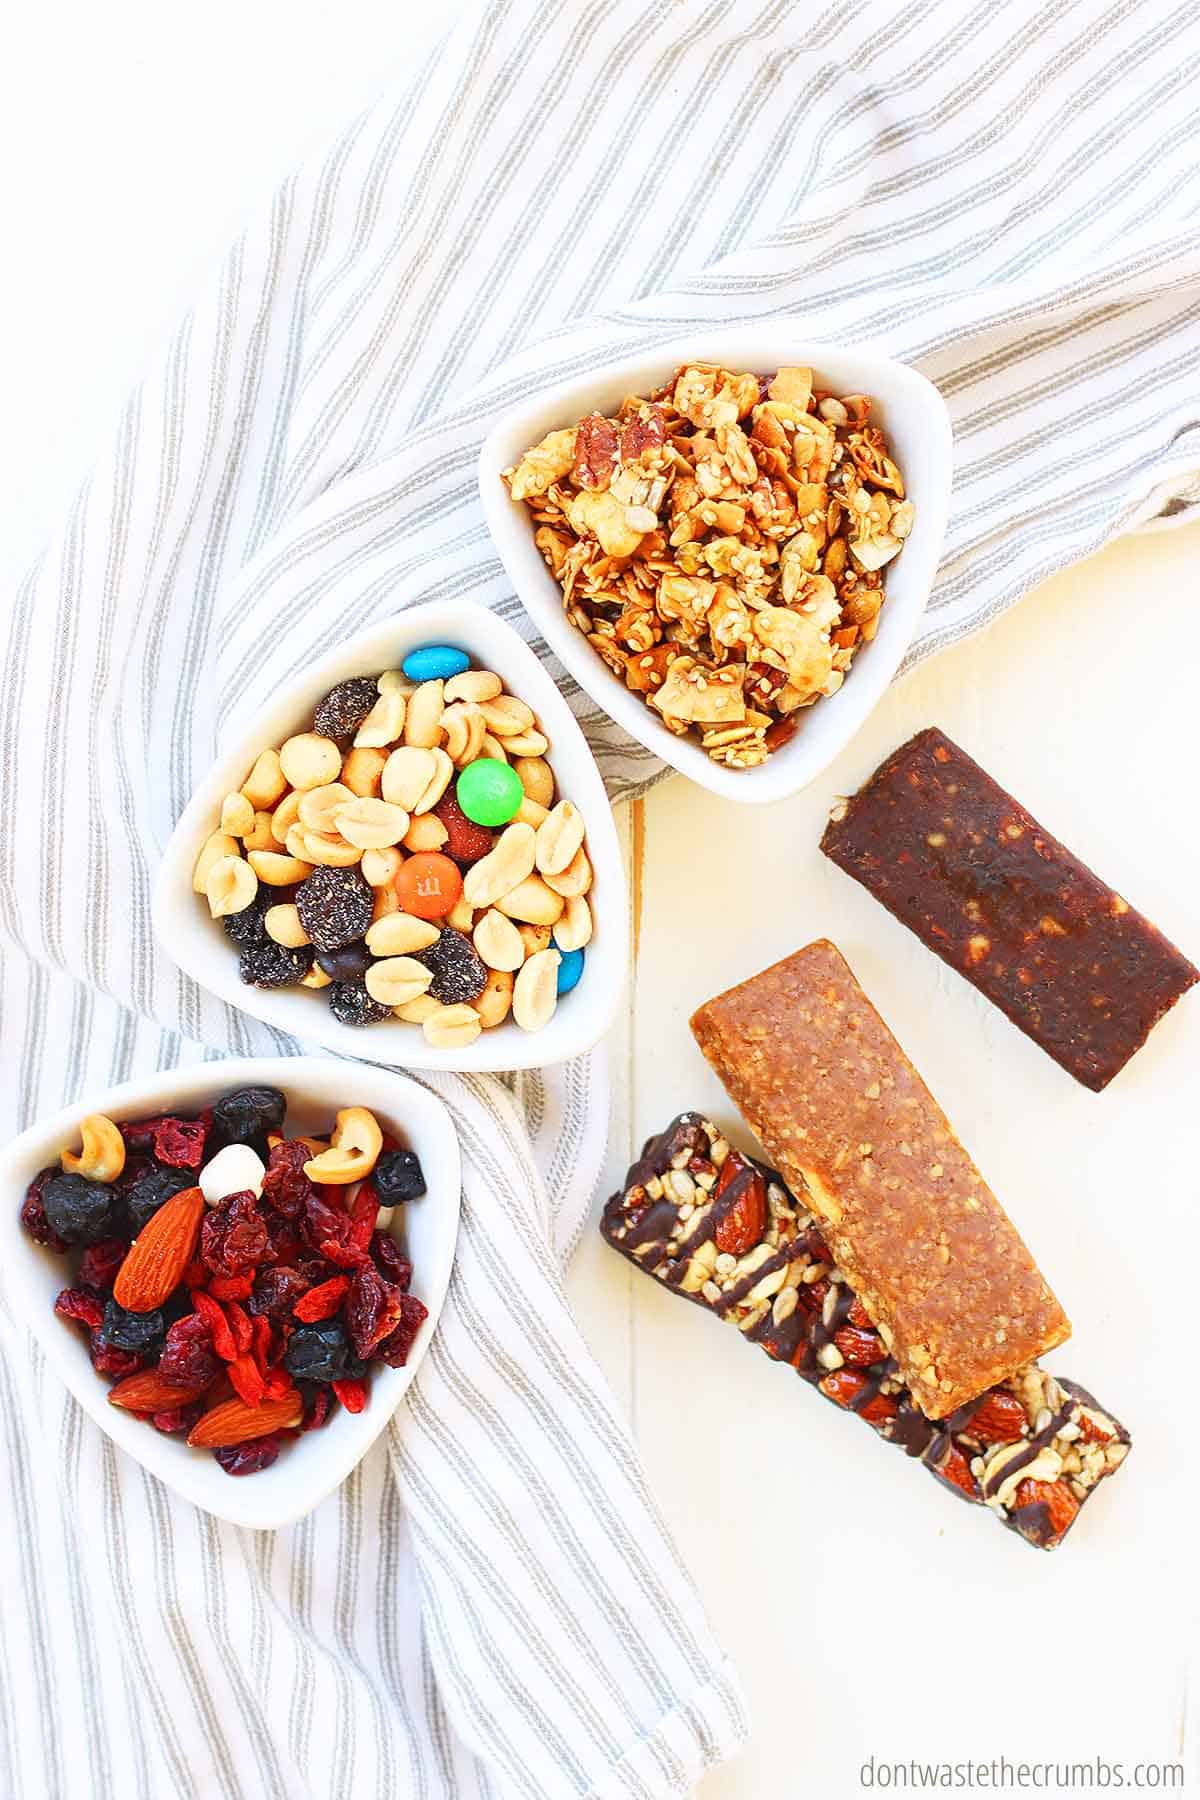 Trail mixes, granola bars, fruit bars are all ideal road trip snack ideas!